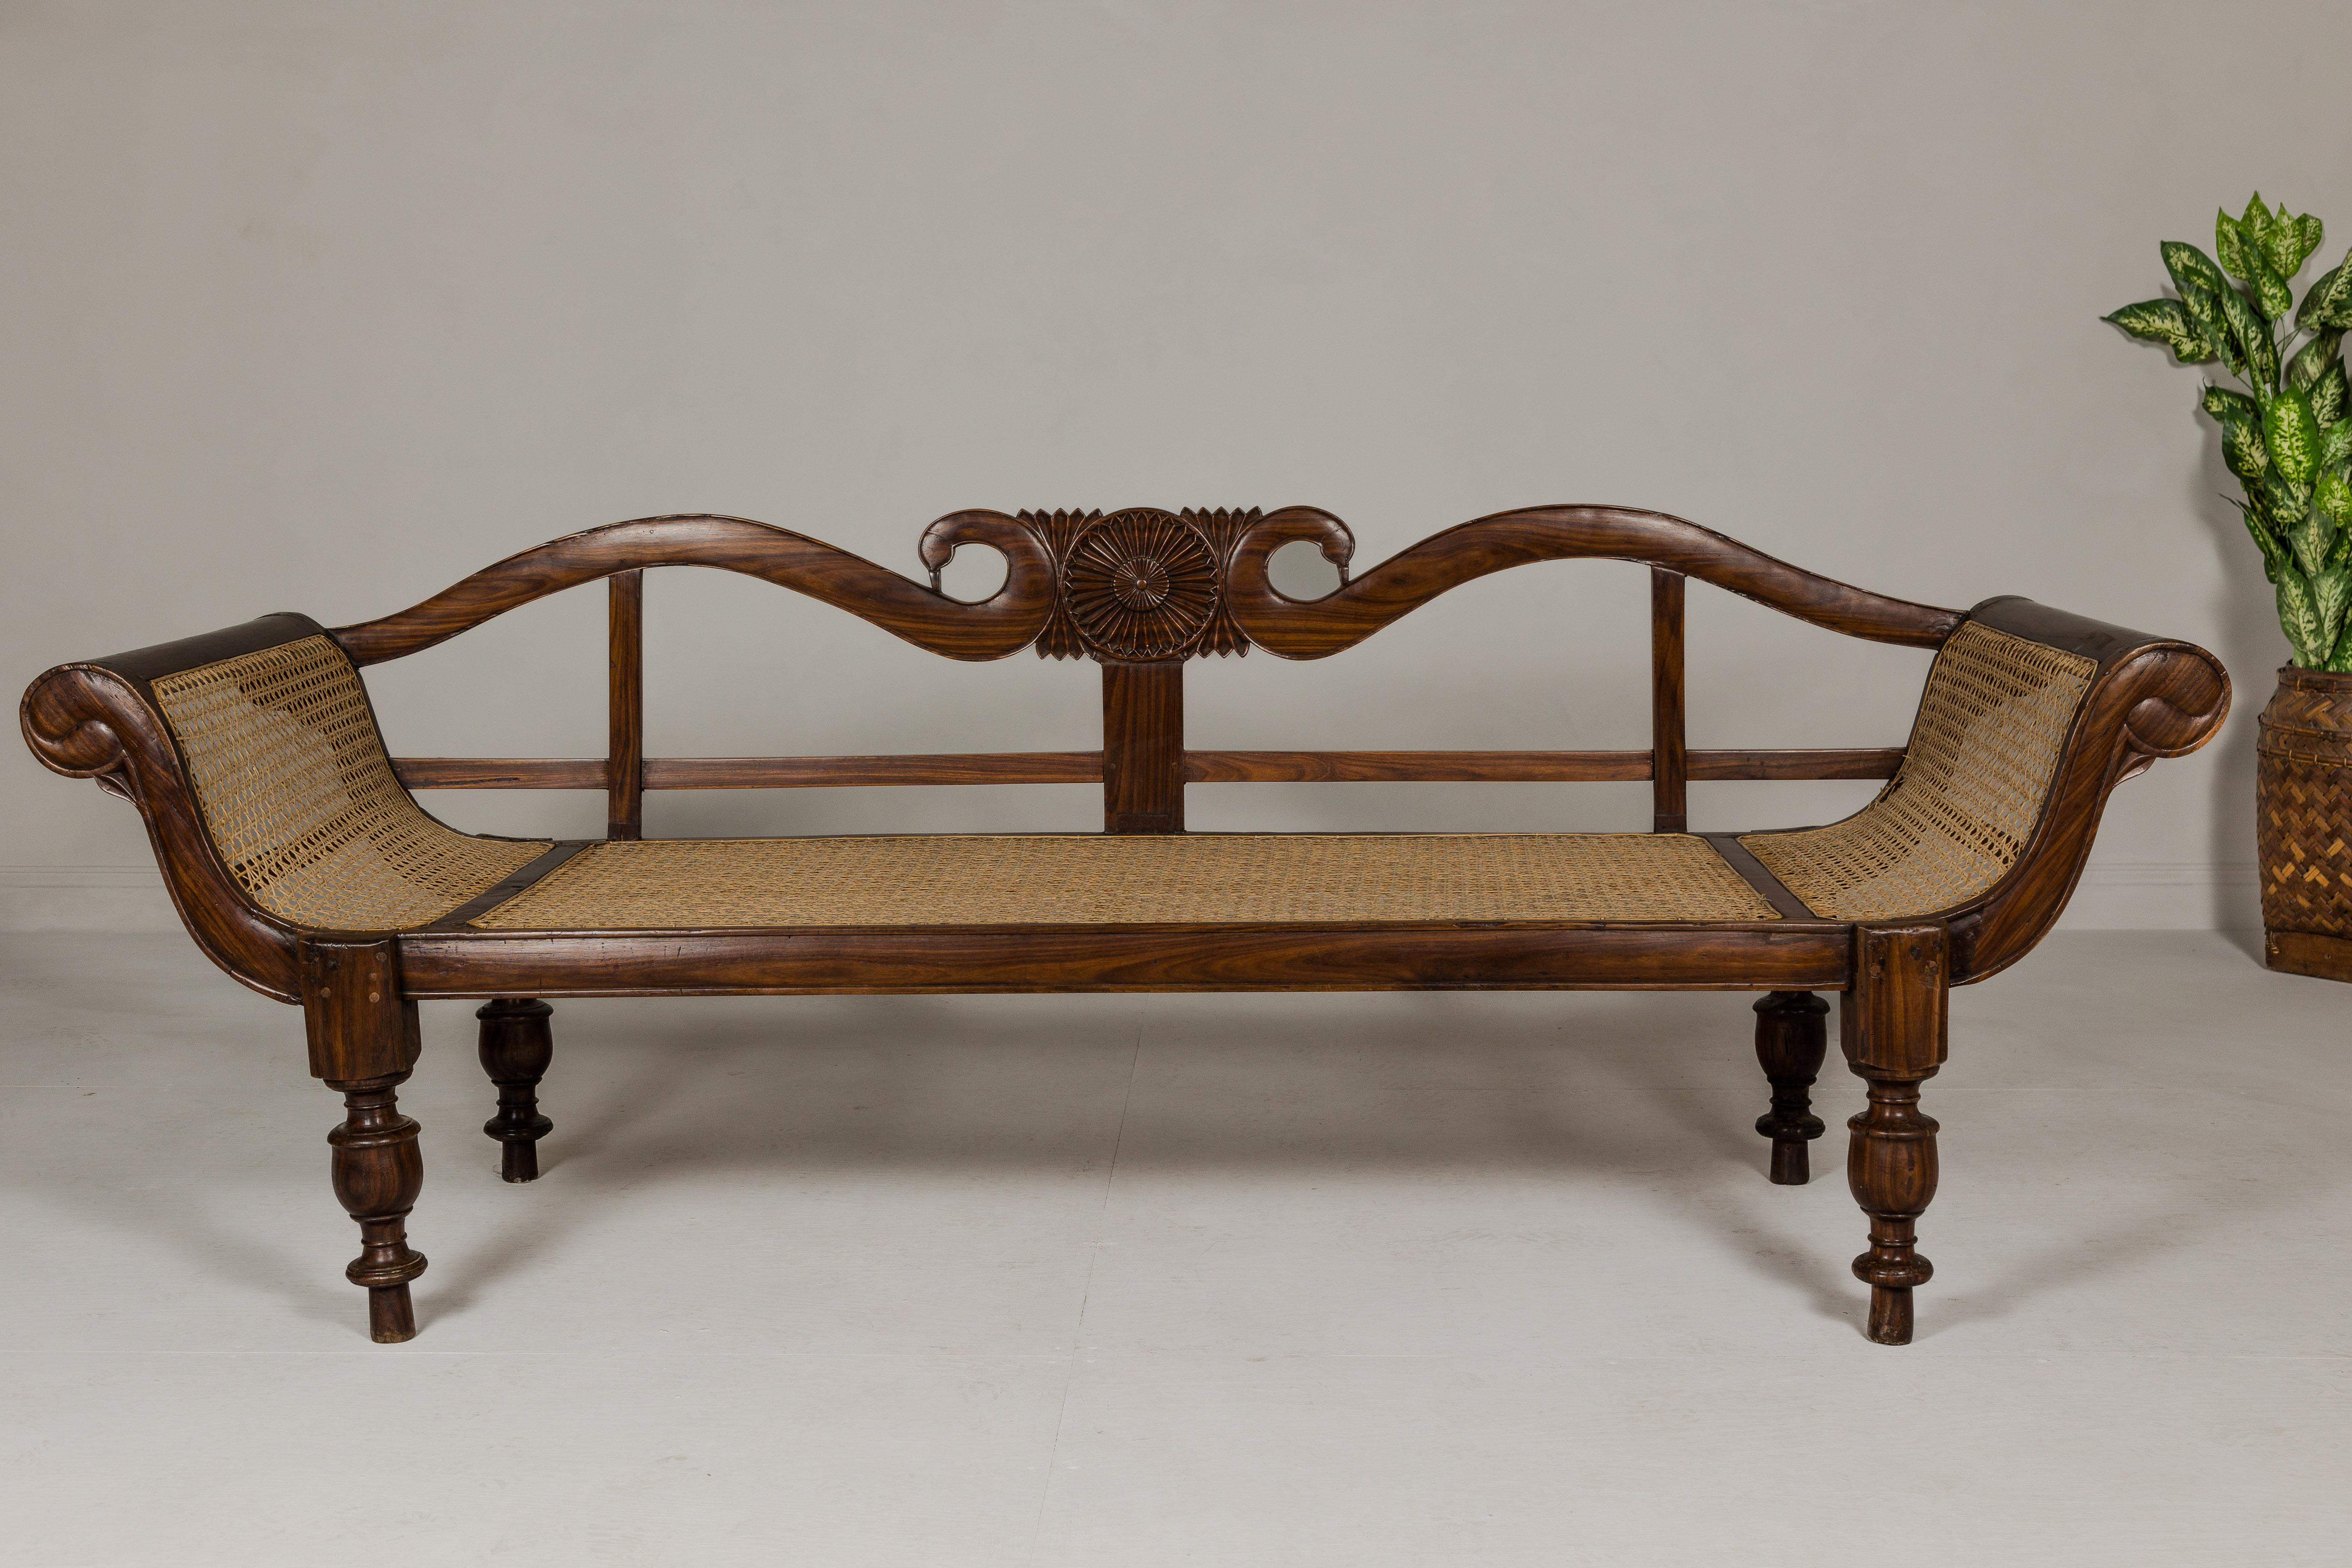 British Colonial Carved and Cane Settee with Swan Neck Back and Scrolling Arms For Sale 2